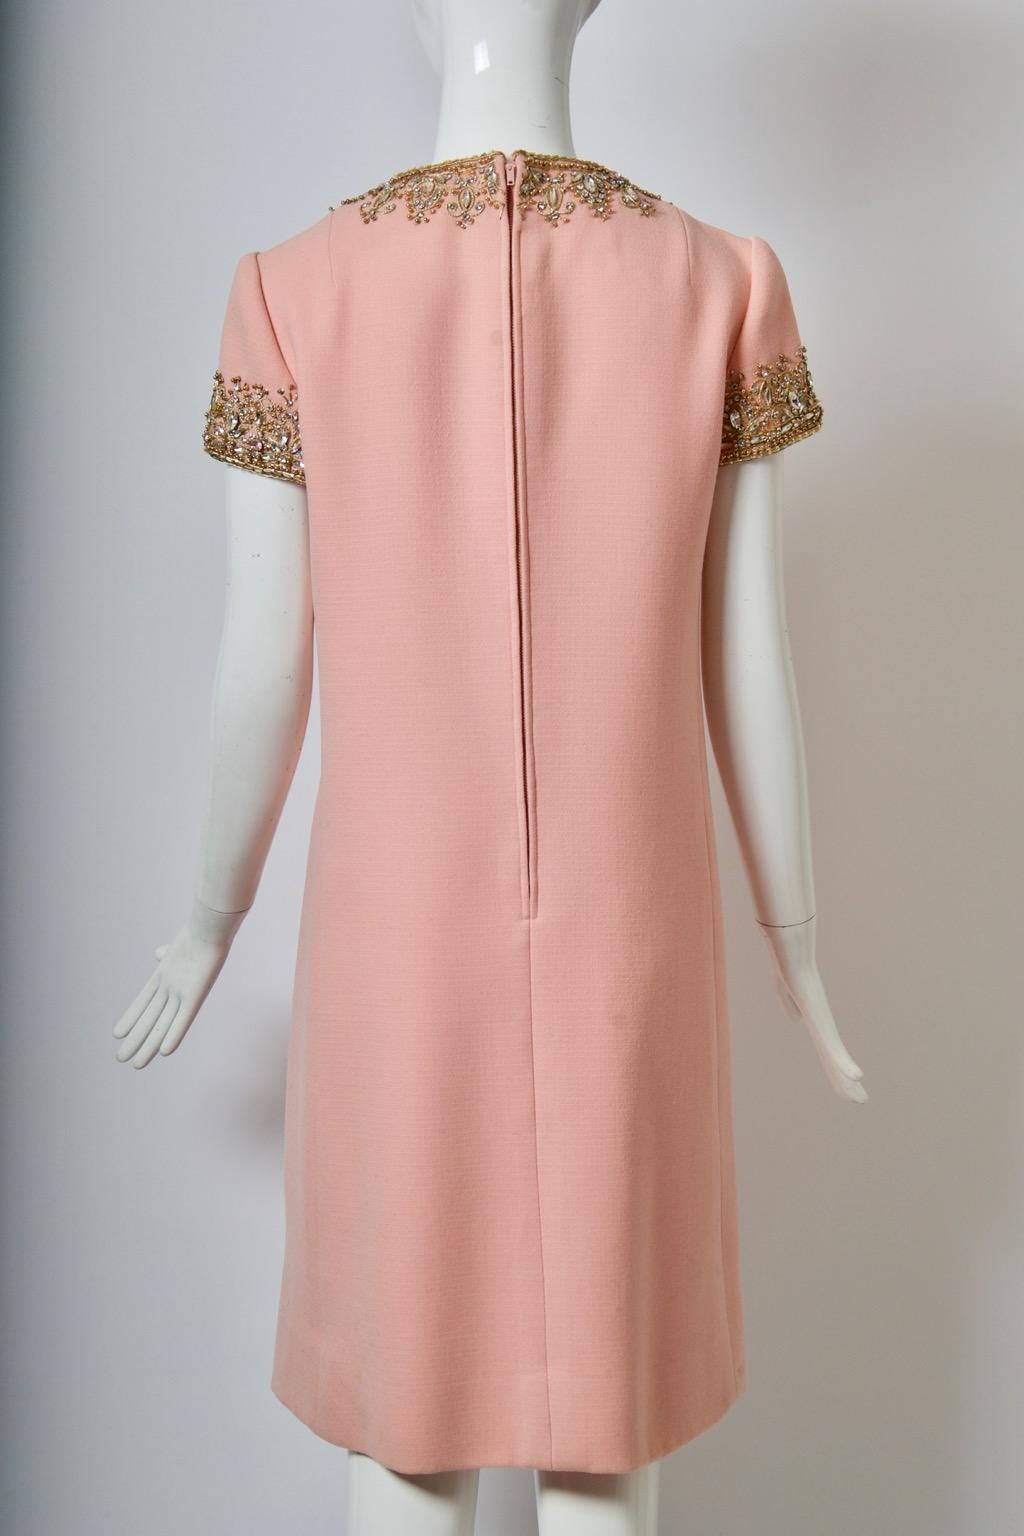 Women's 1960s Pink Beaded Cocktail Dress For Sale